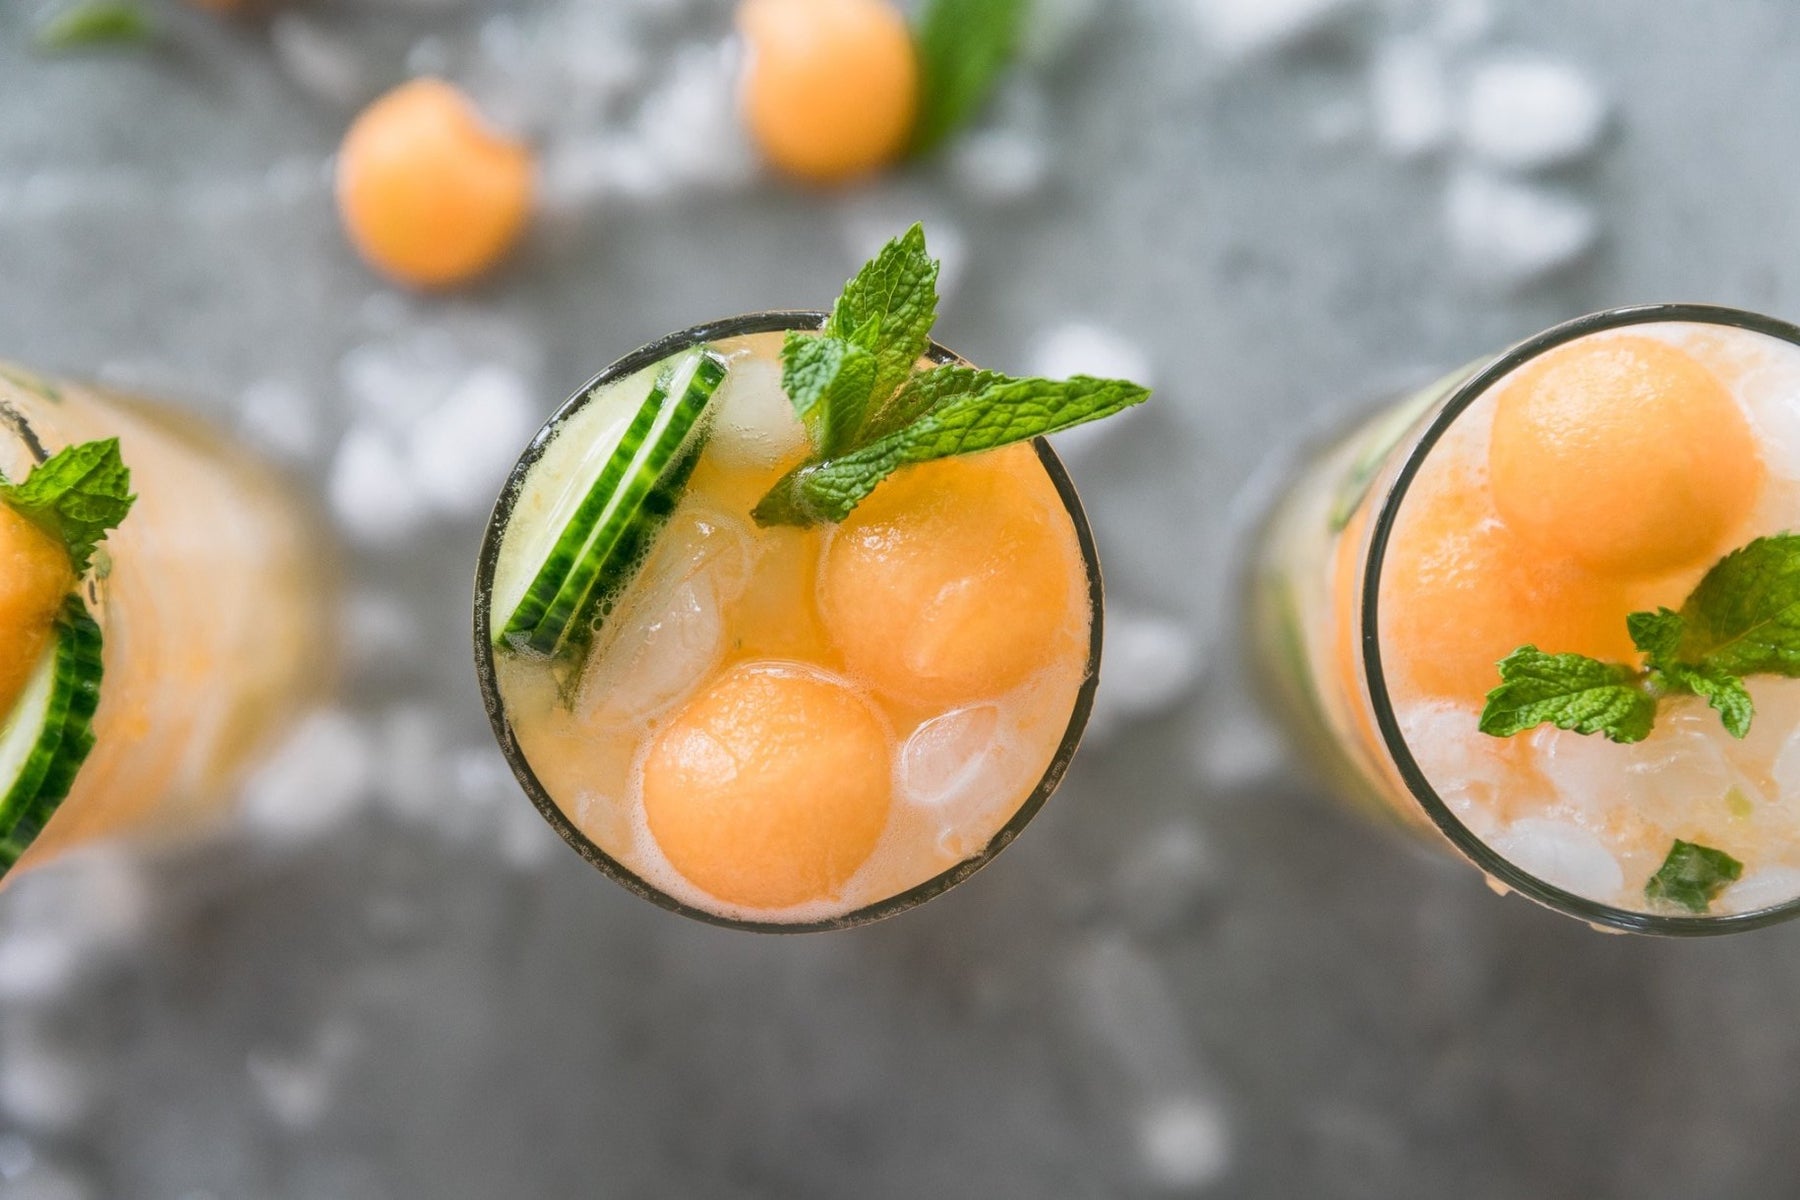 It's time for summer cocktails